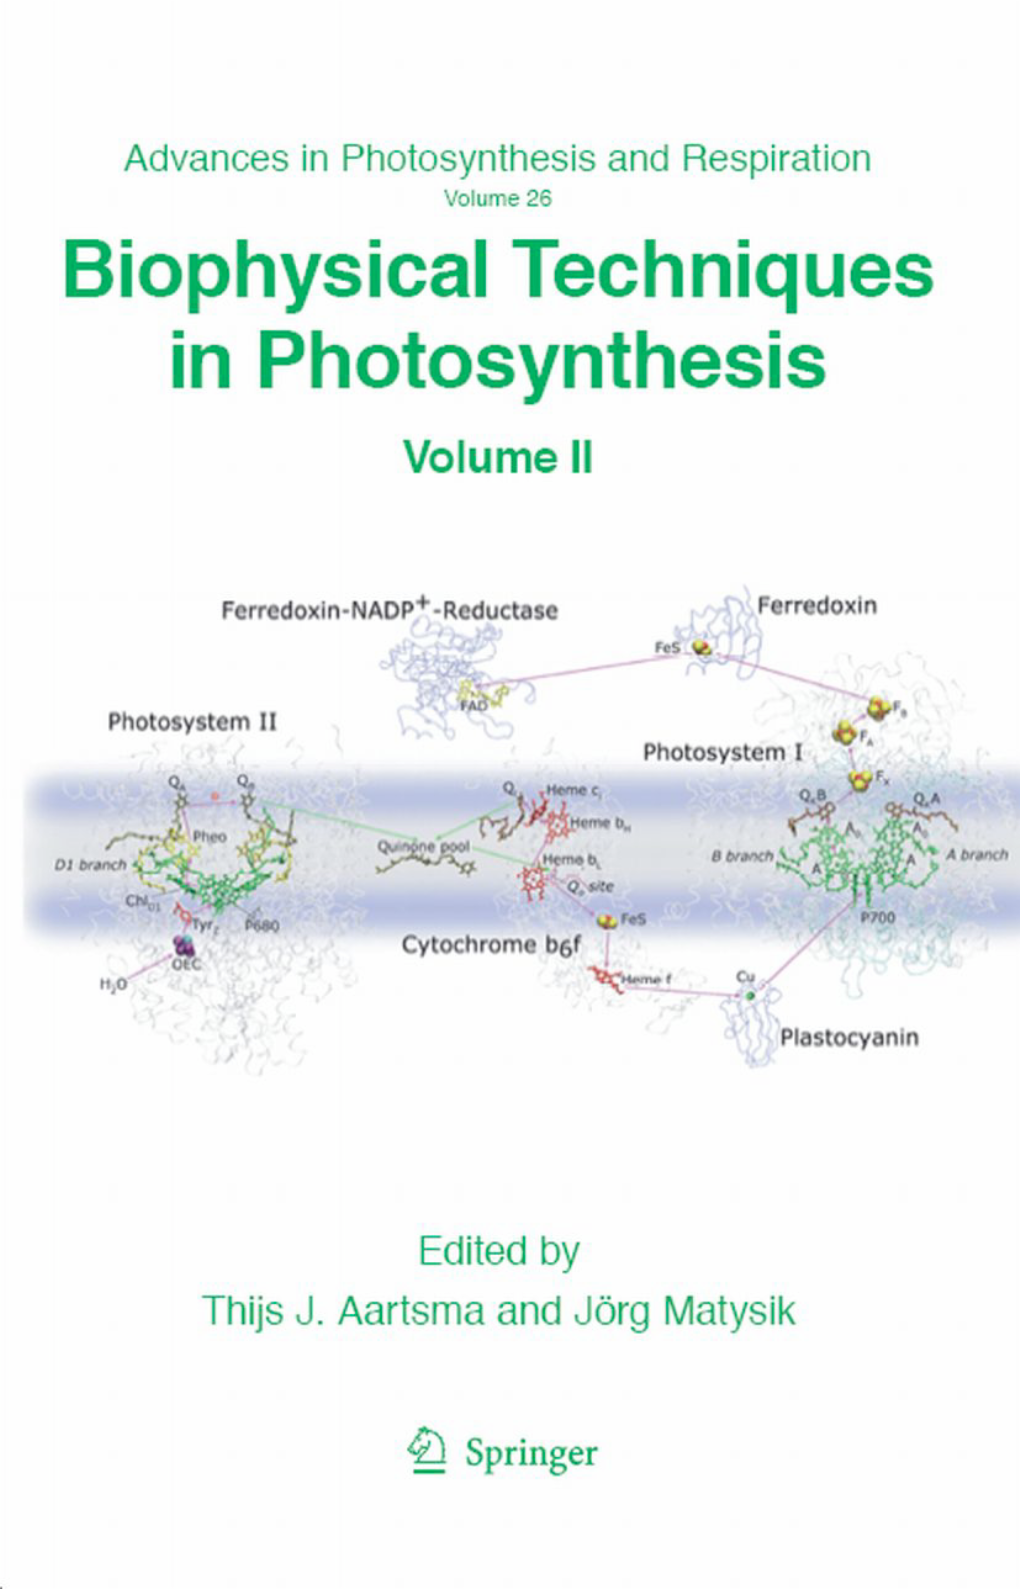 Advances in Photosynthesis and Respiration